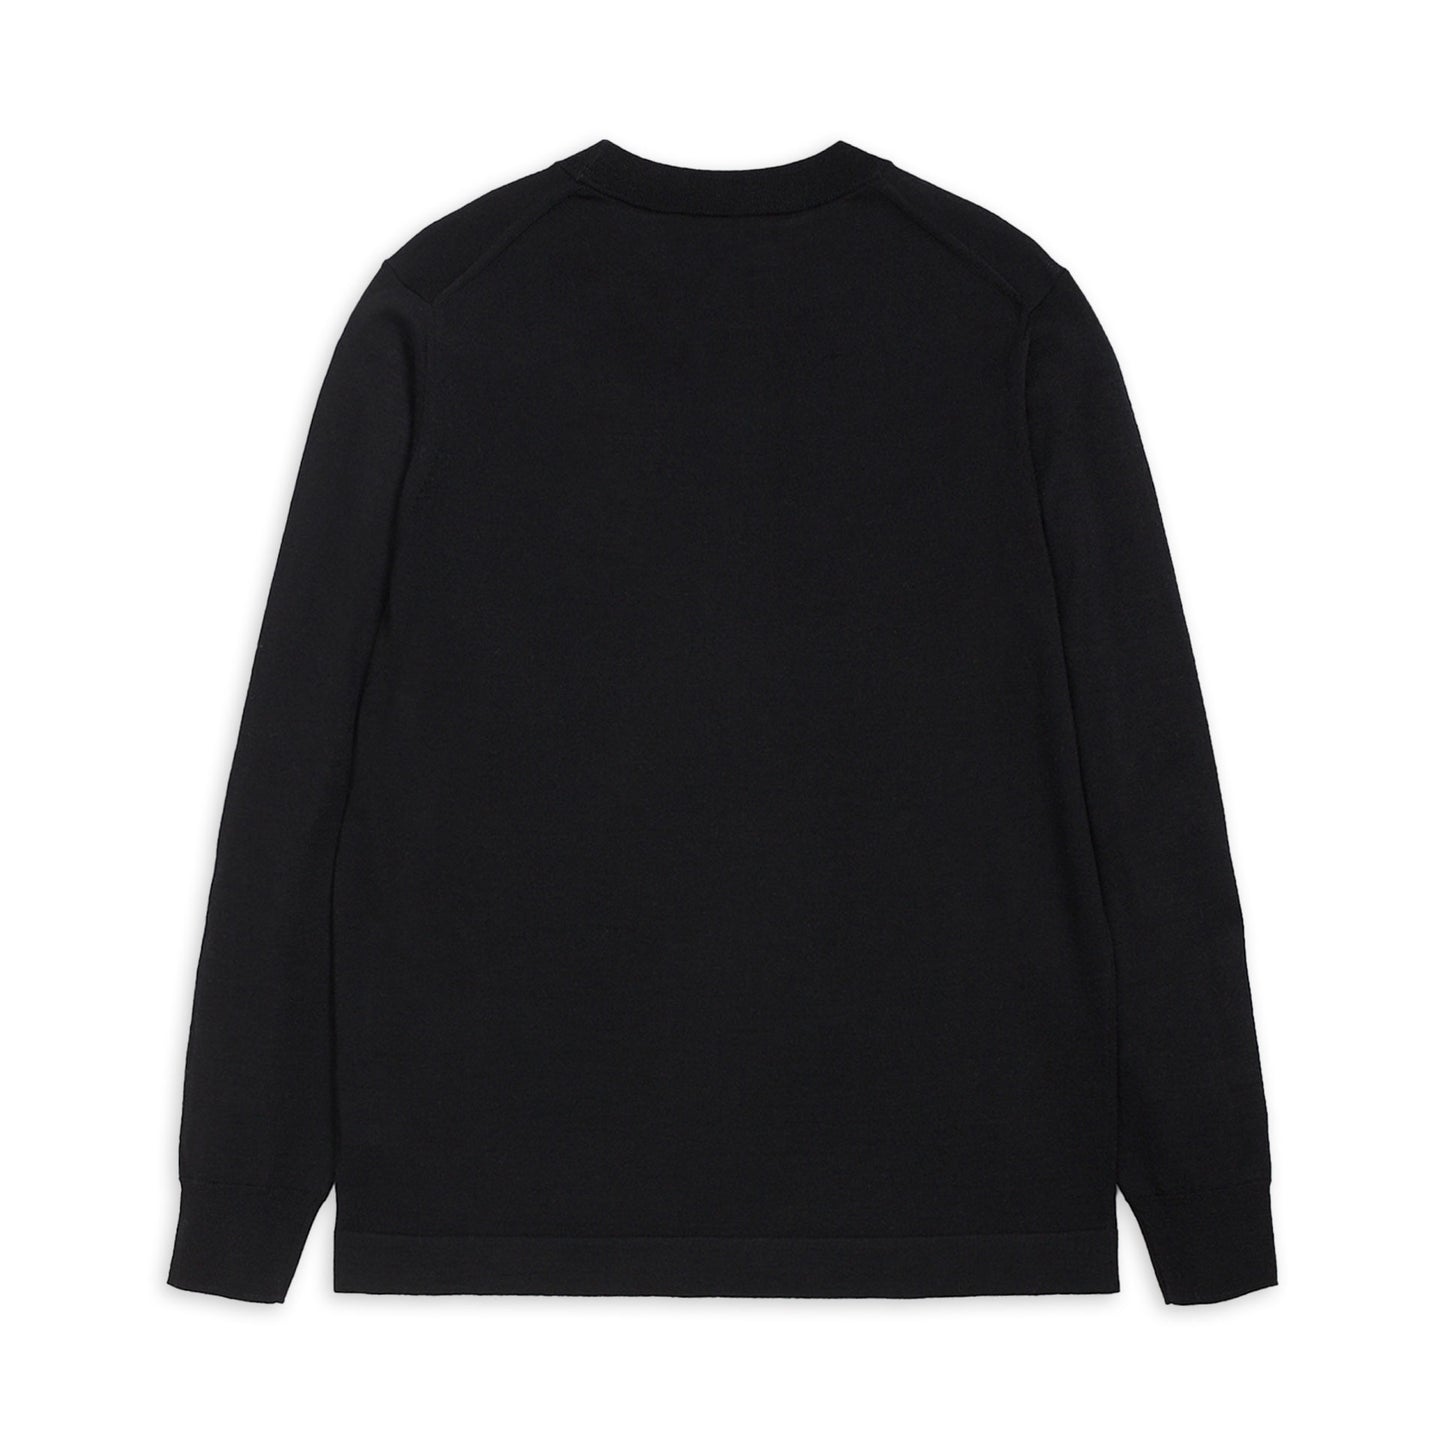 Norse Projects Teis Tech Merino Sweater